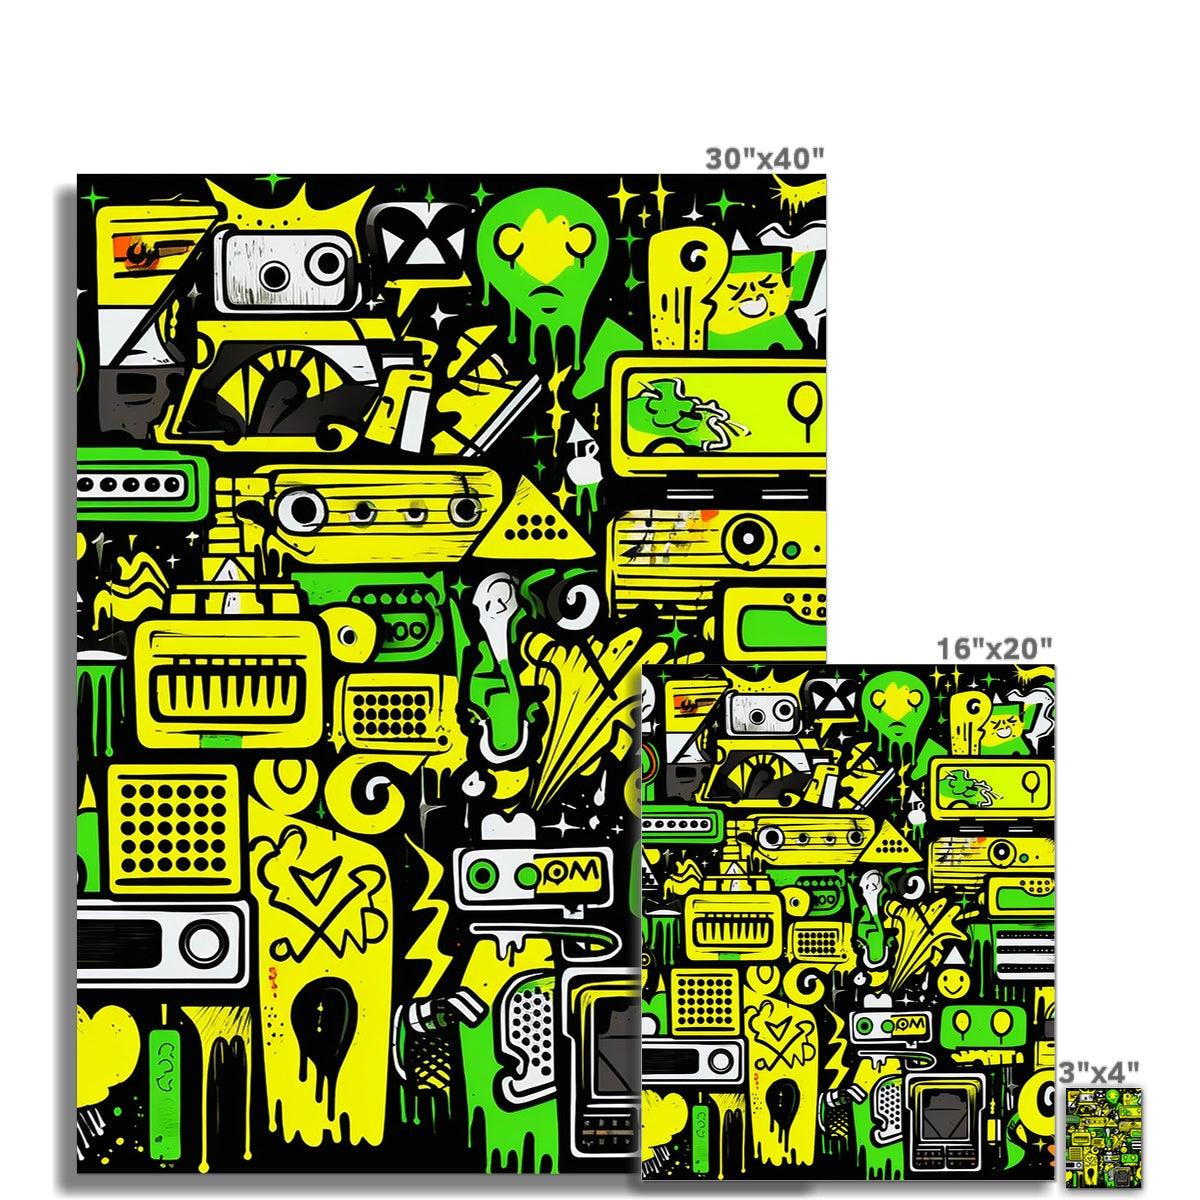 Graffiti Green and Yellow Abstract: A Dive into Vibrant Urban Art C-Type Print - D'Sare 